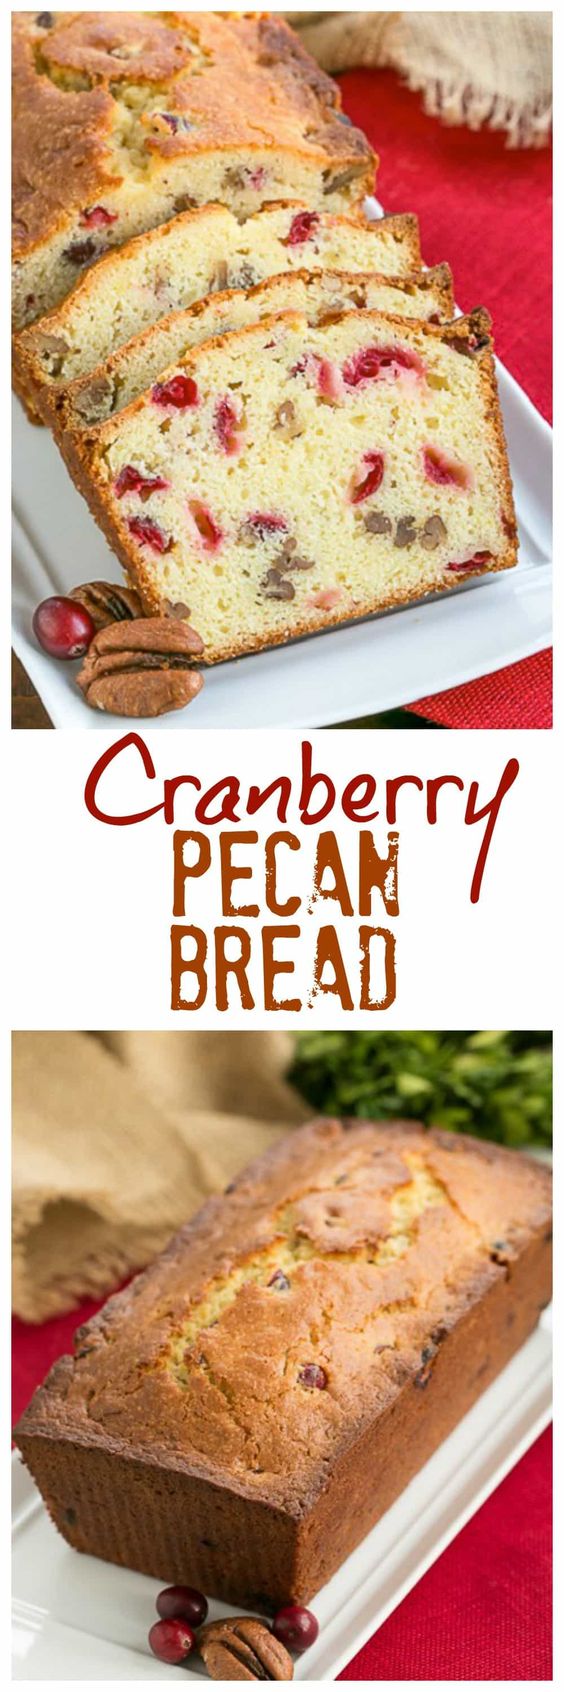 Cranberry-Bread-with-Pecans